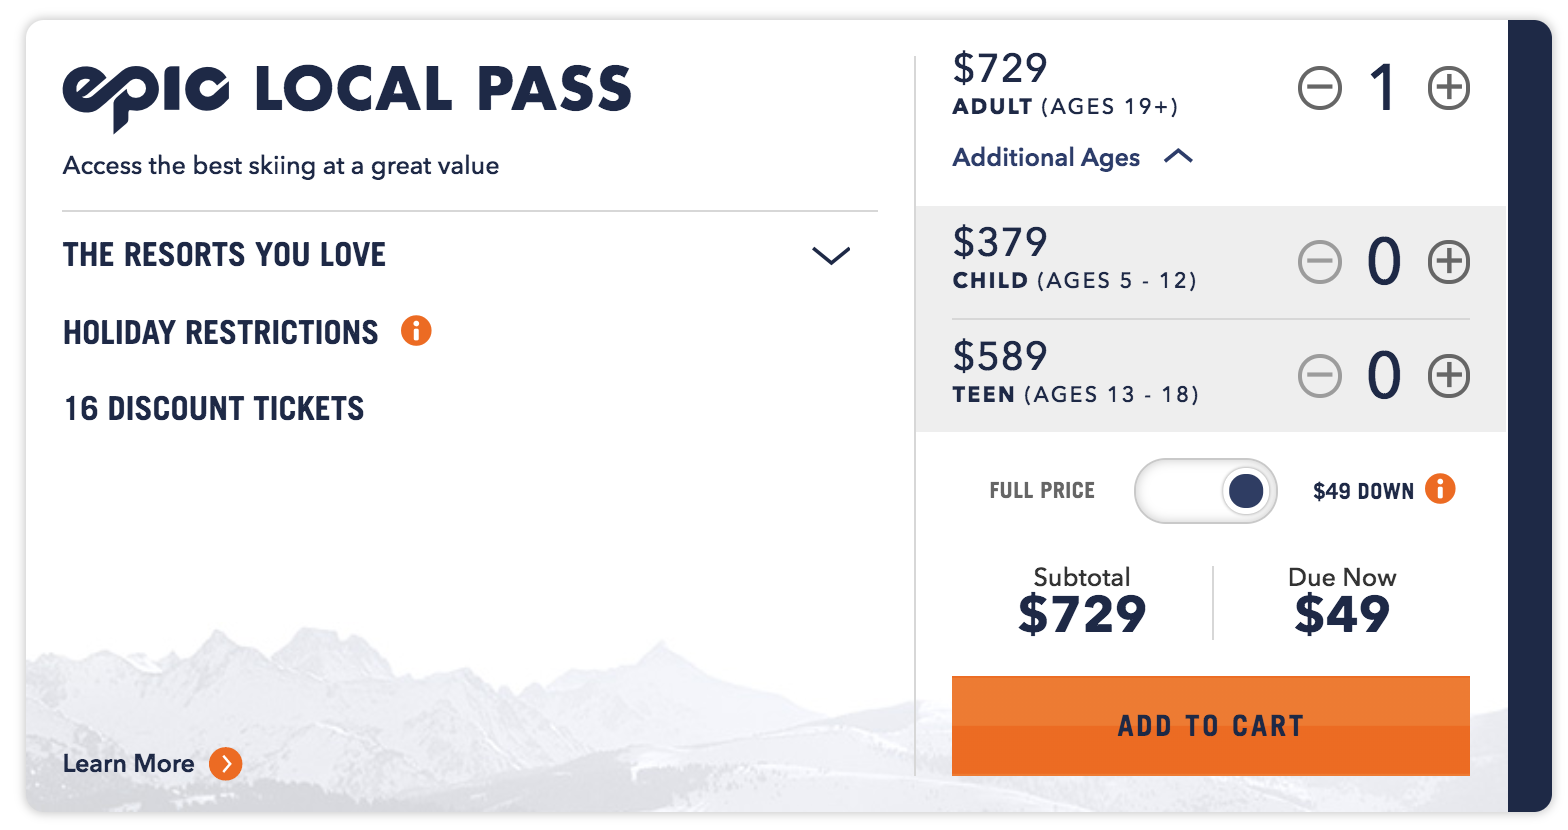 Epic pass 2021 provides many different options